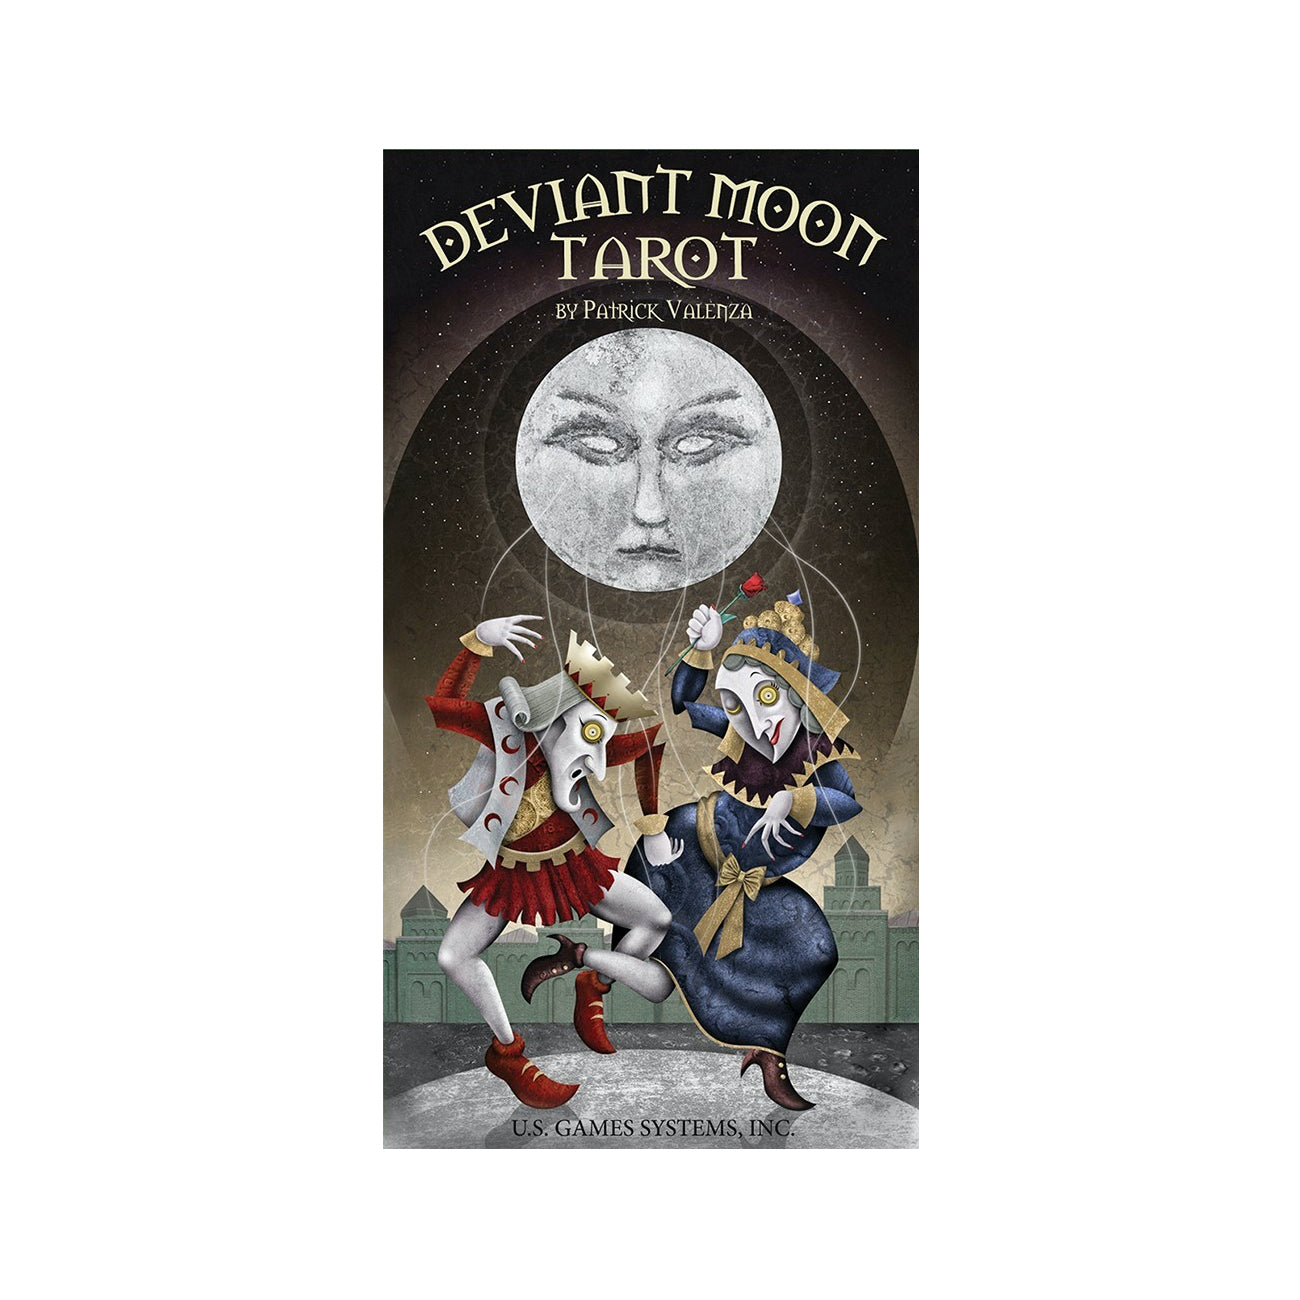 Deviant Moon Tarot Card Deck and Book by Patrick Valenza